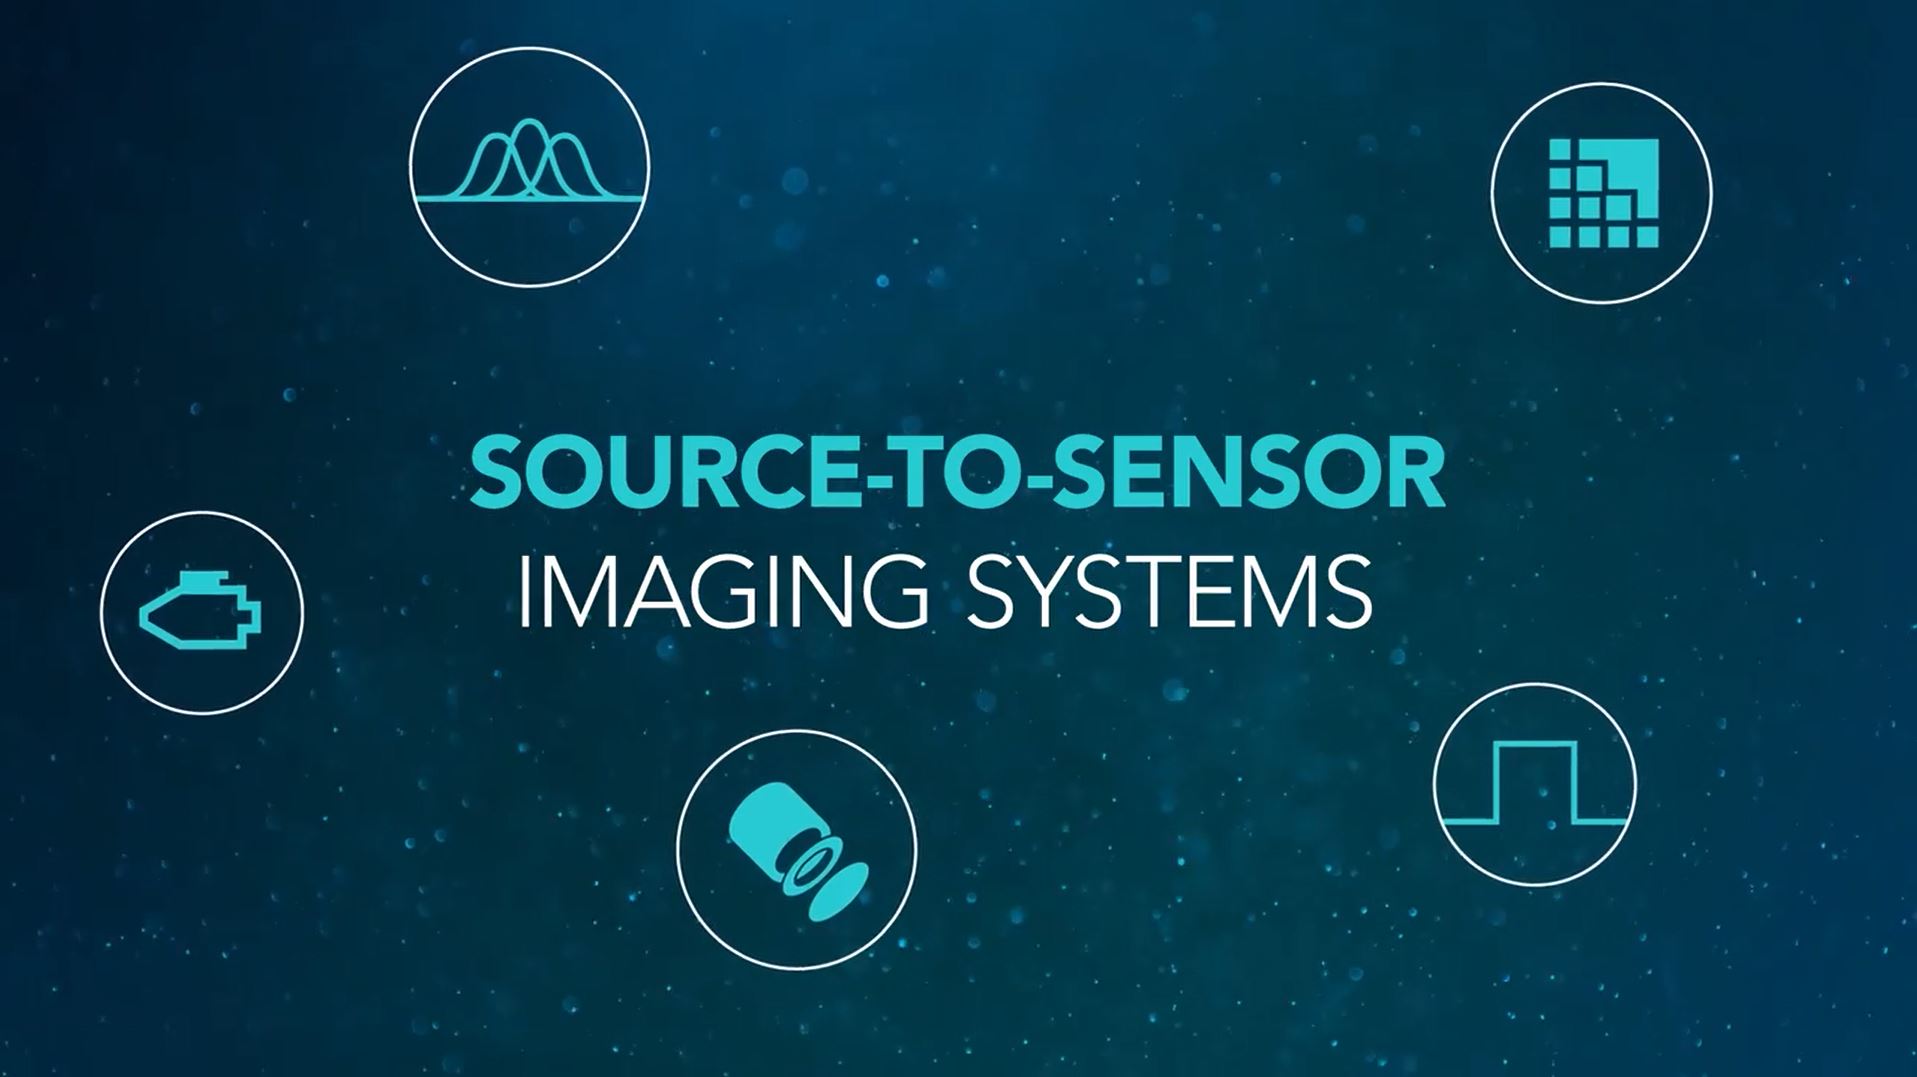 source-to-sensor imaging system capabilities icons